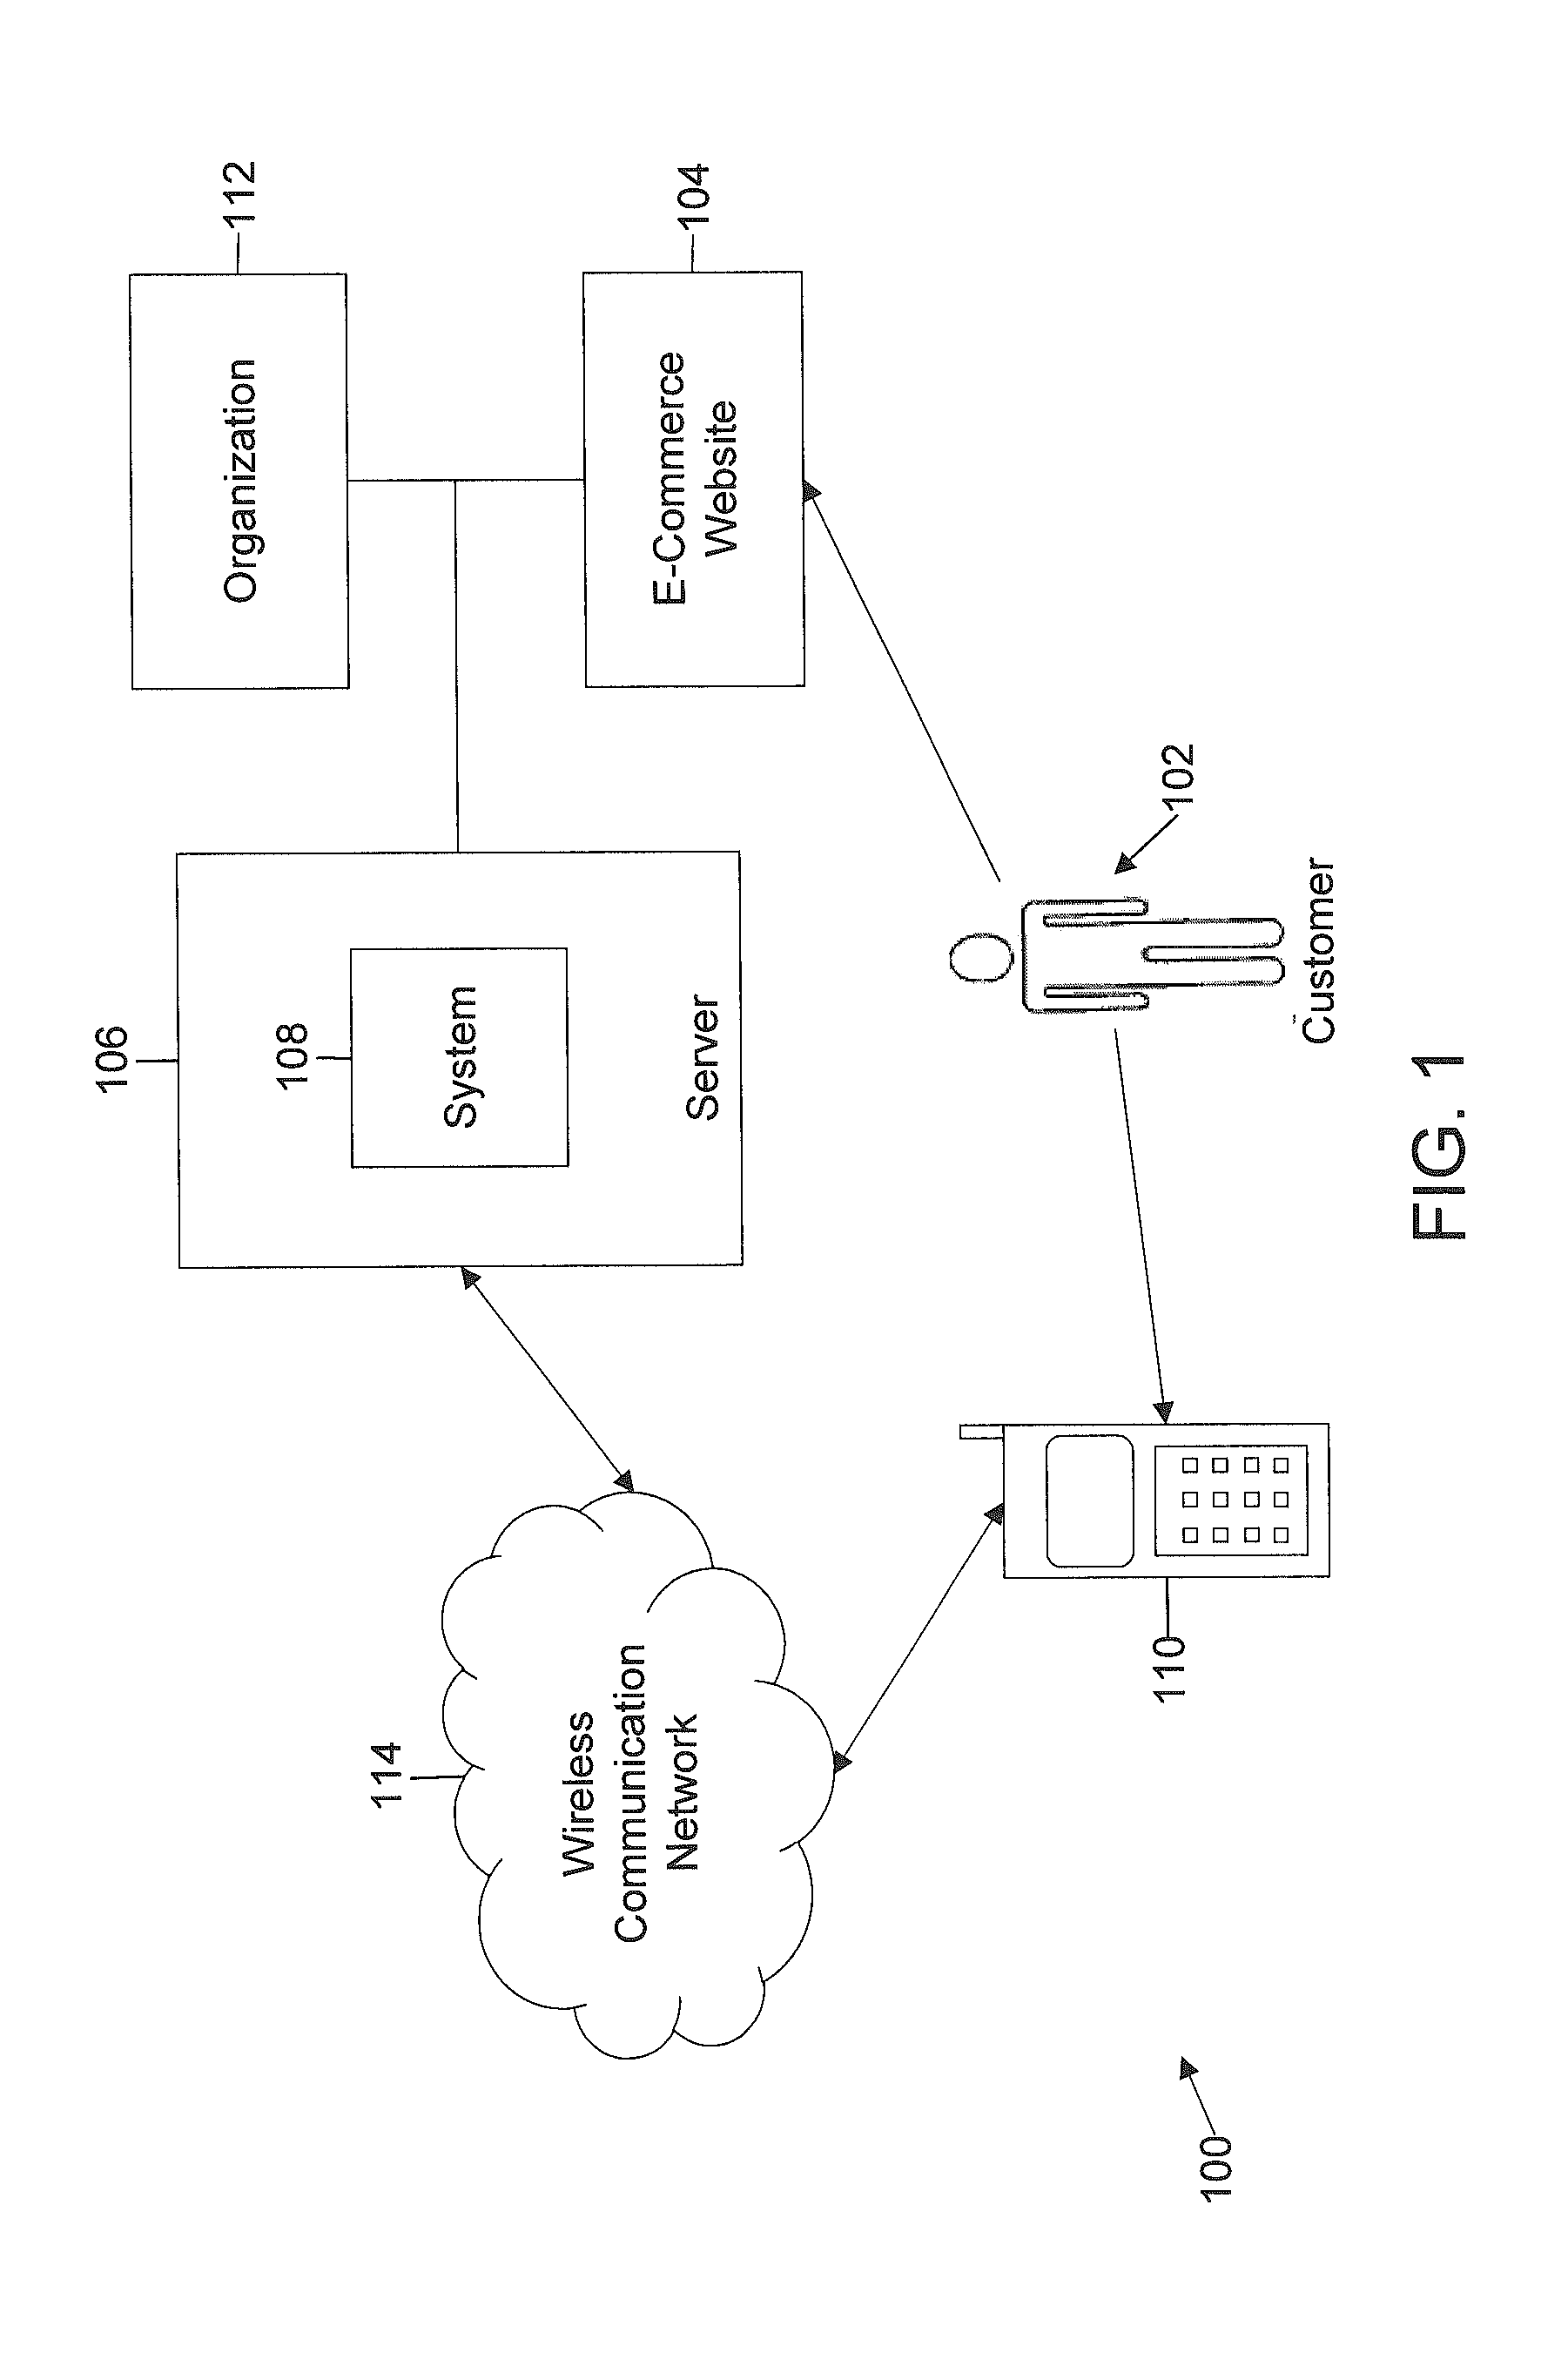 Method and system for making secure payments